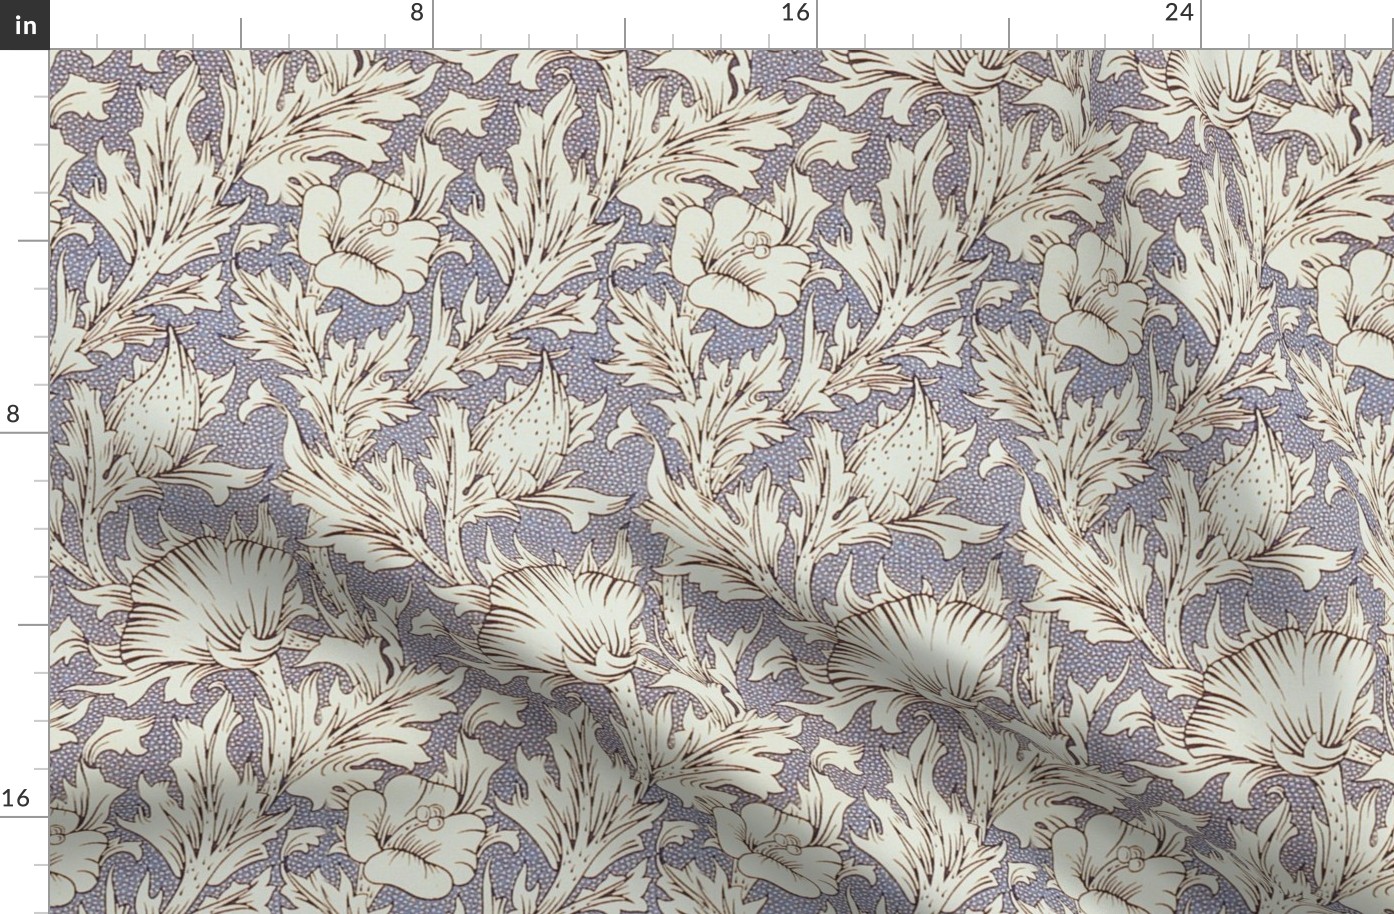 Late 1800s William Morris - Burnished Ivory on Gray Speckled Floral